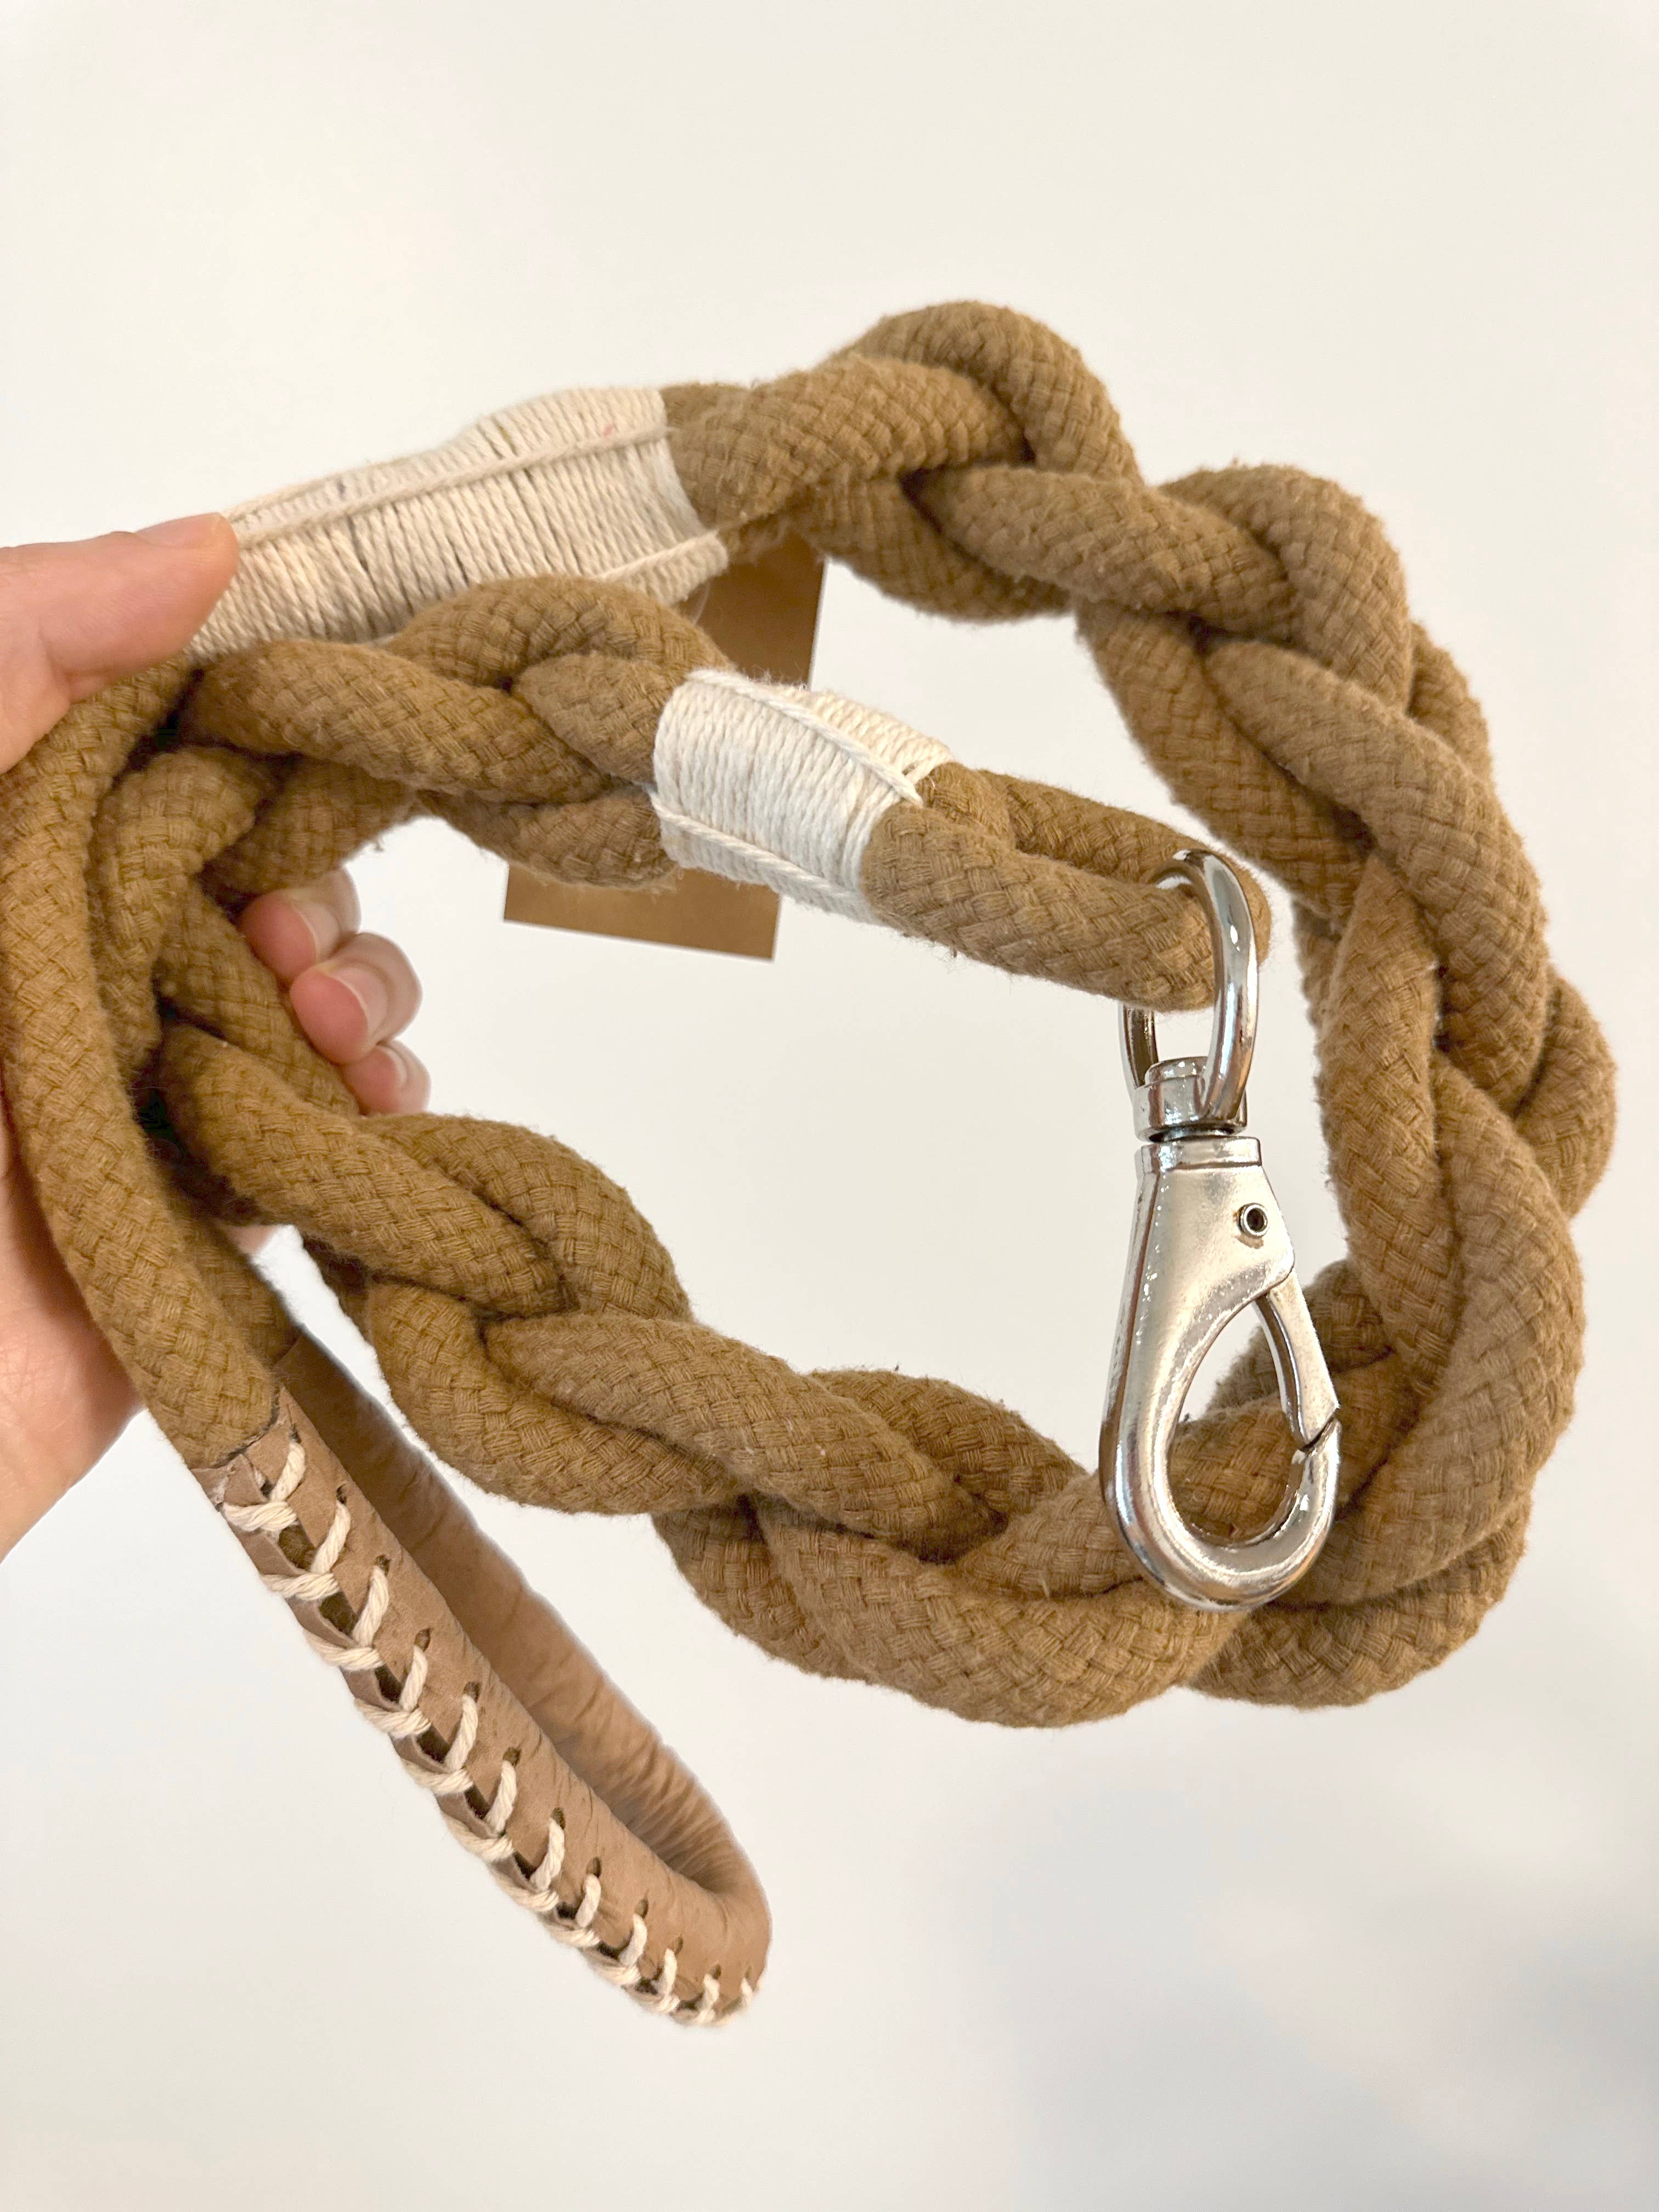 Handmade Sustainable  Cotton Rope Dog Leash, Eco-friendly: Earth Brown